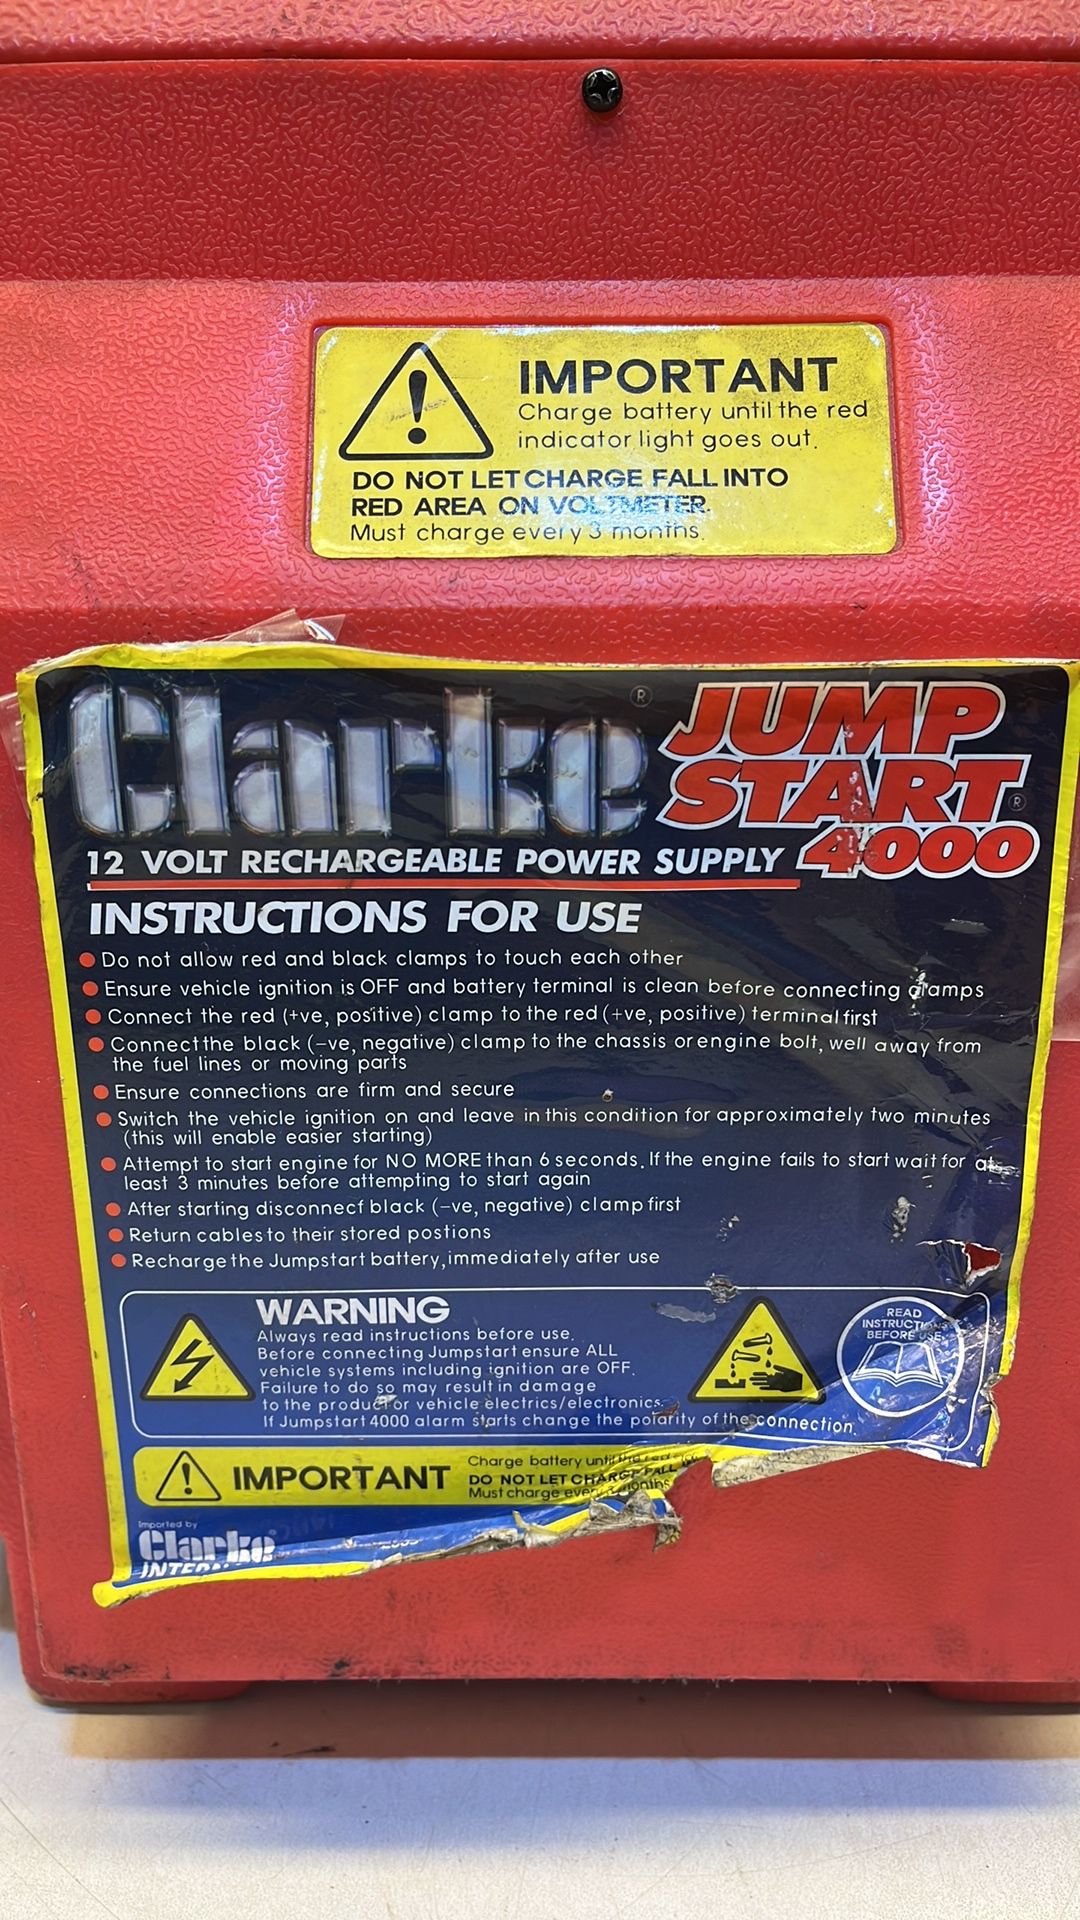 Clarke Jump Start 4000 12Volt Rechargeable Power Supply - Image 2 of 3